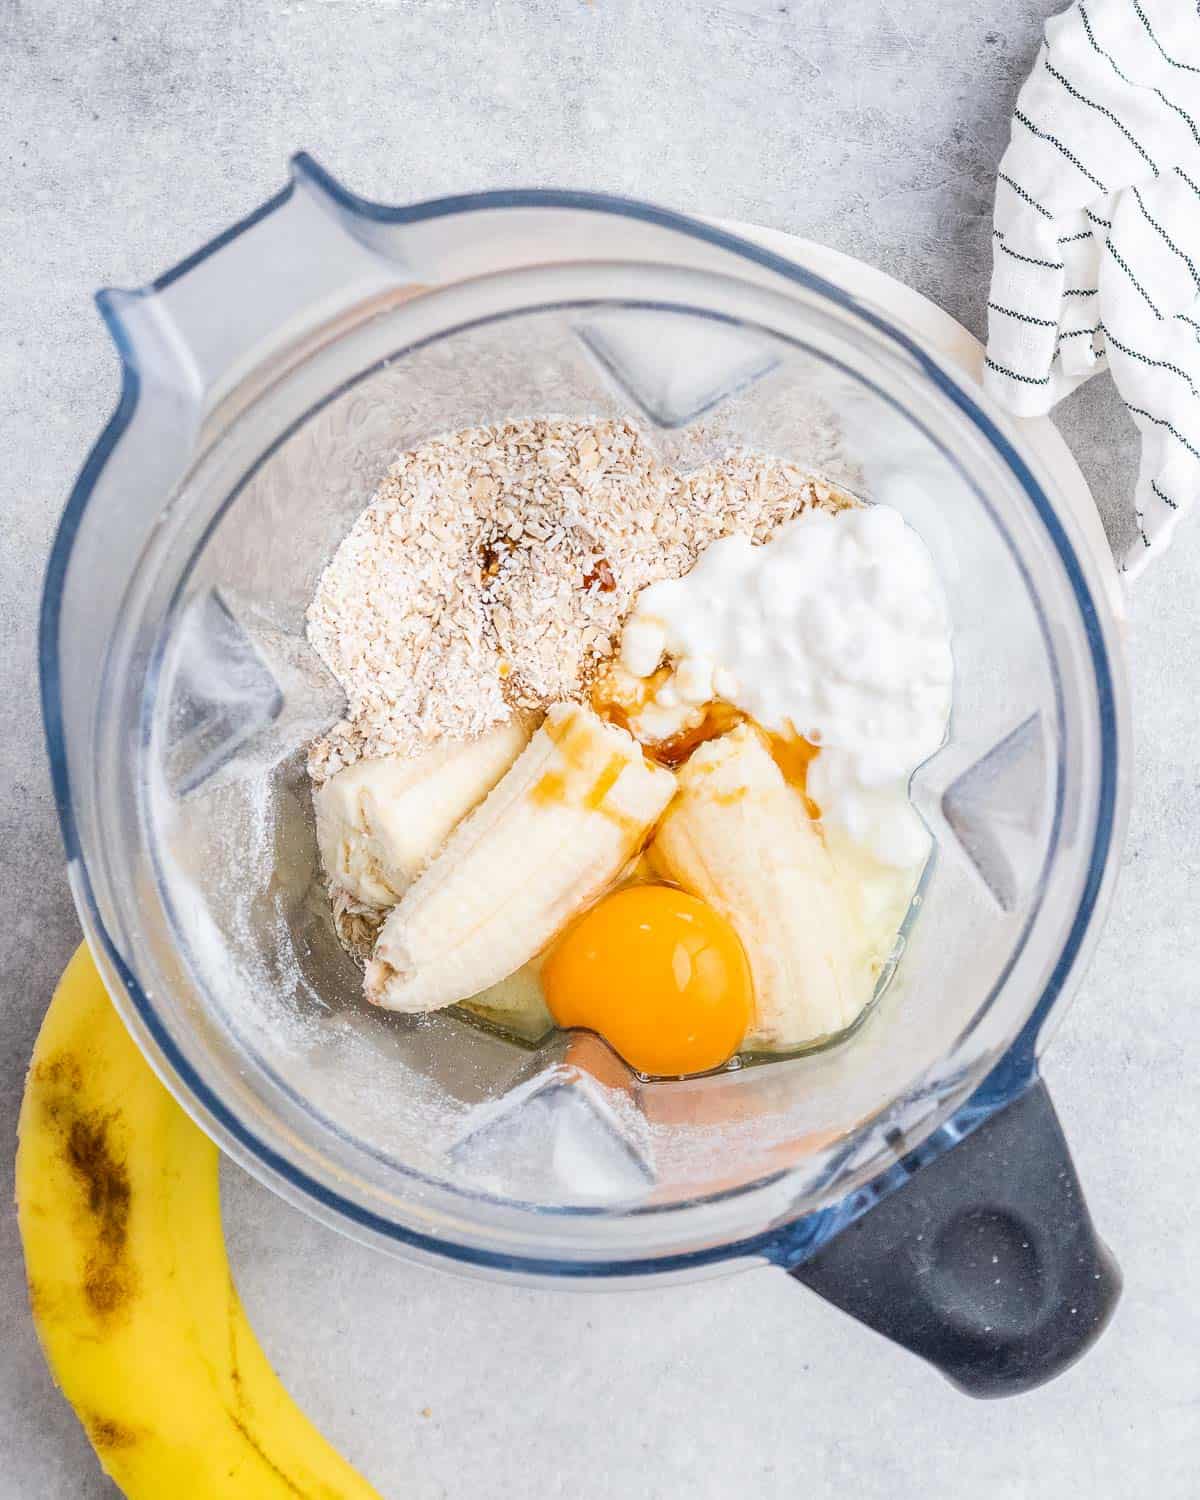 Banana, egg, cottage cheese in a blender.